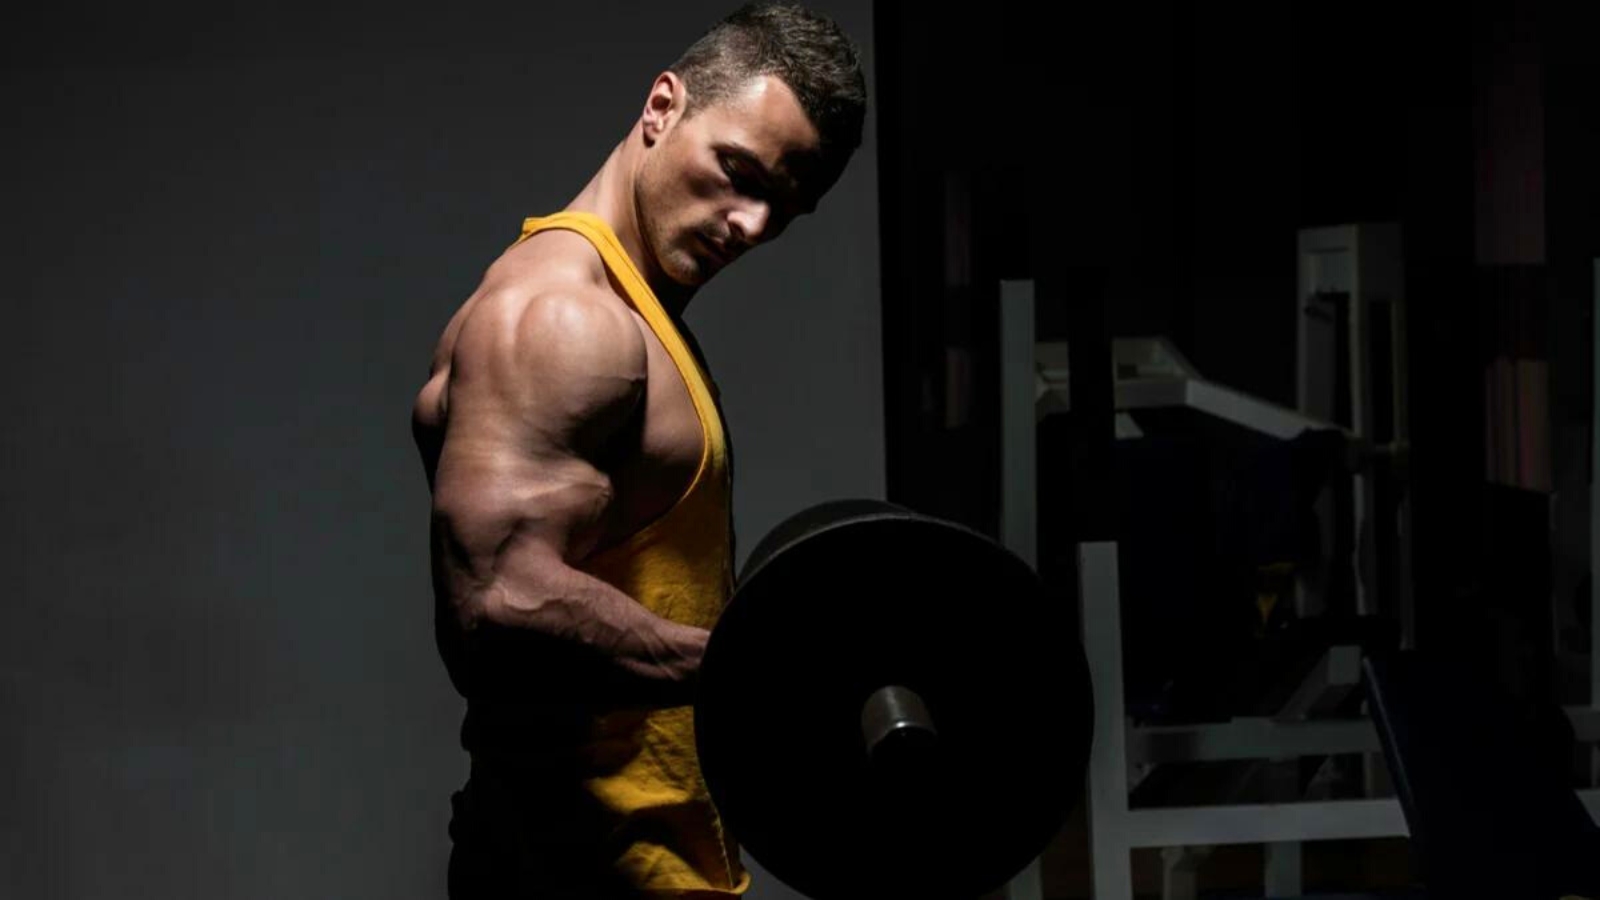 Lean Bulking: A Complete Guide to Building Muscle Without Gaining Fat